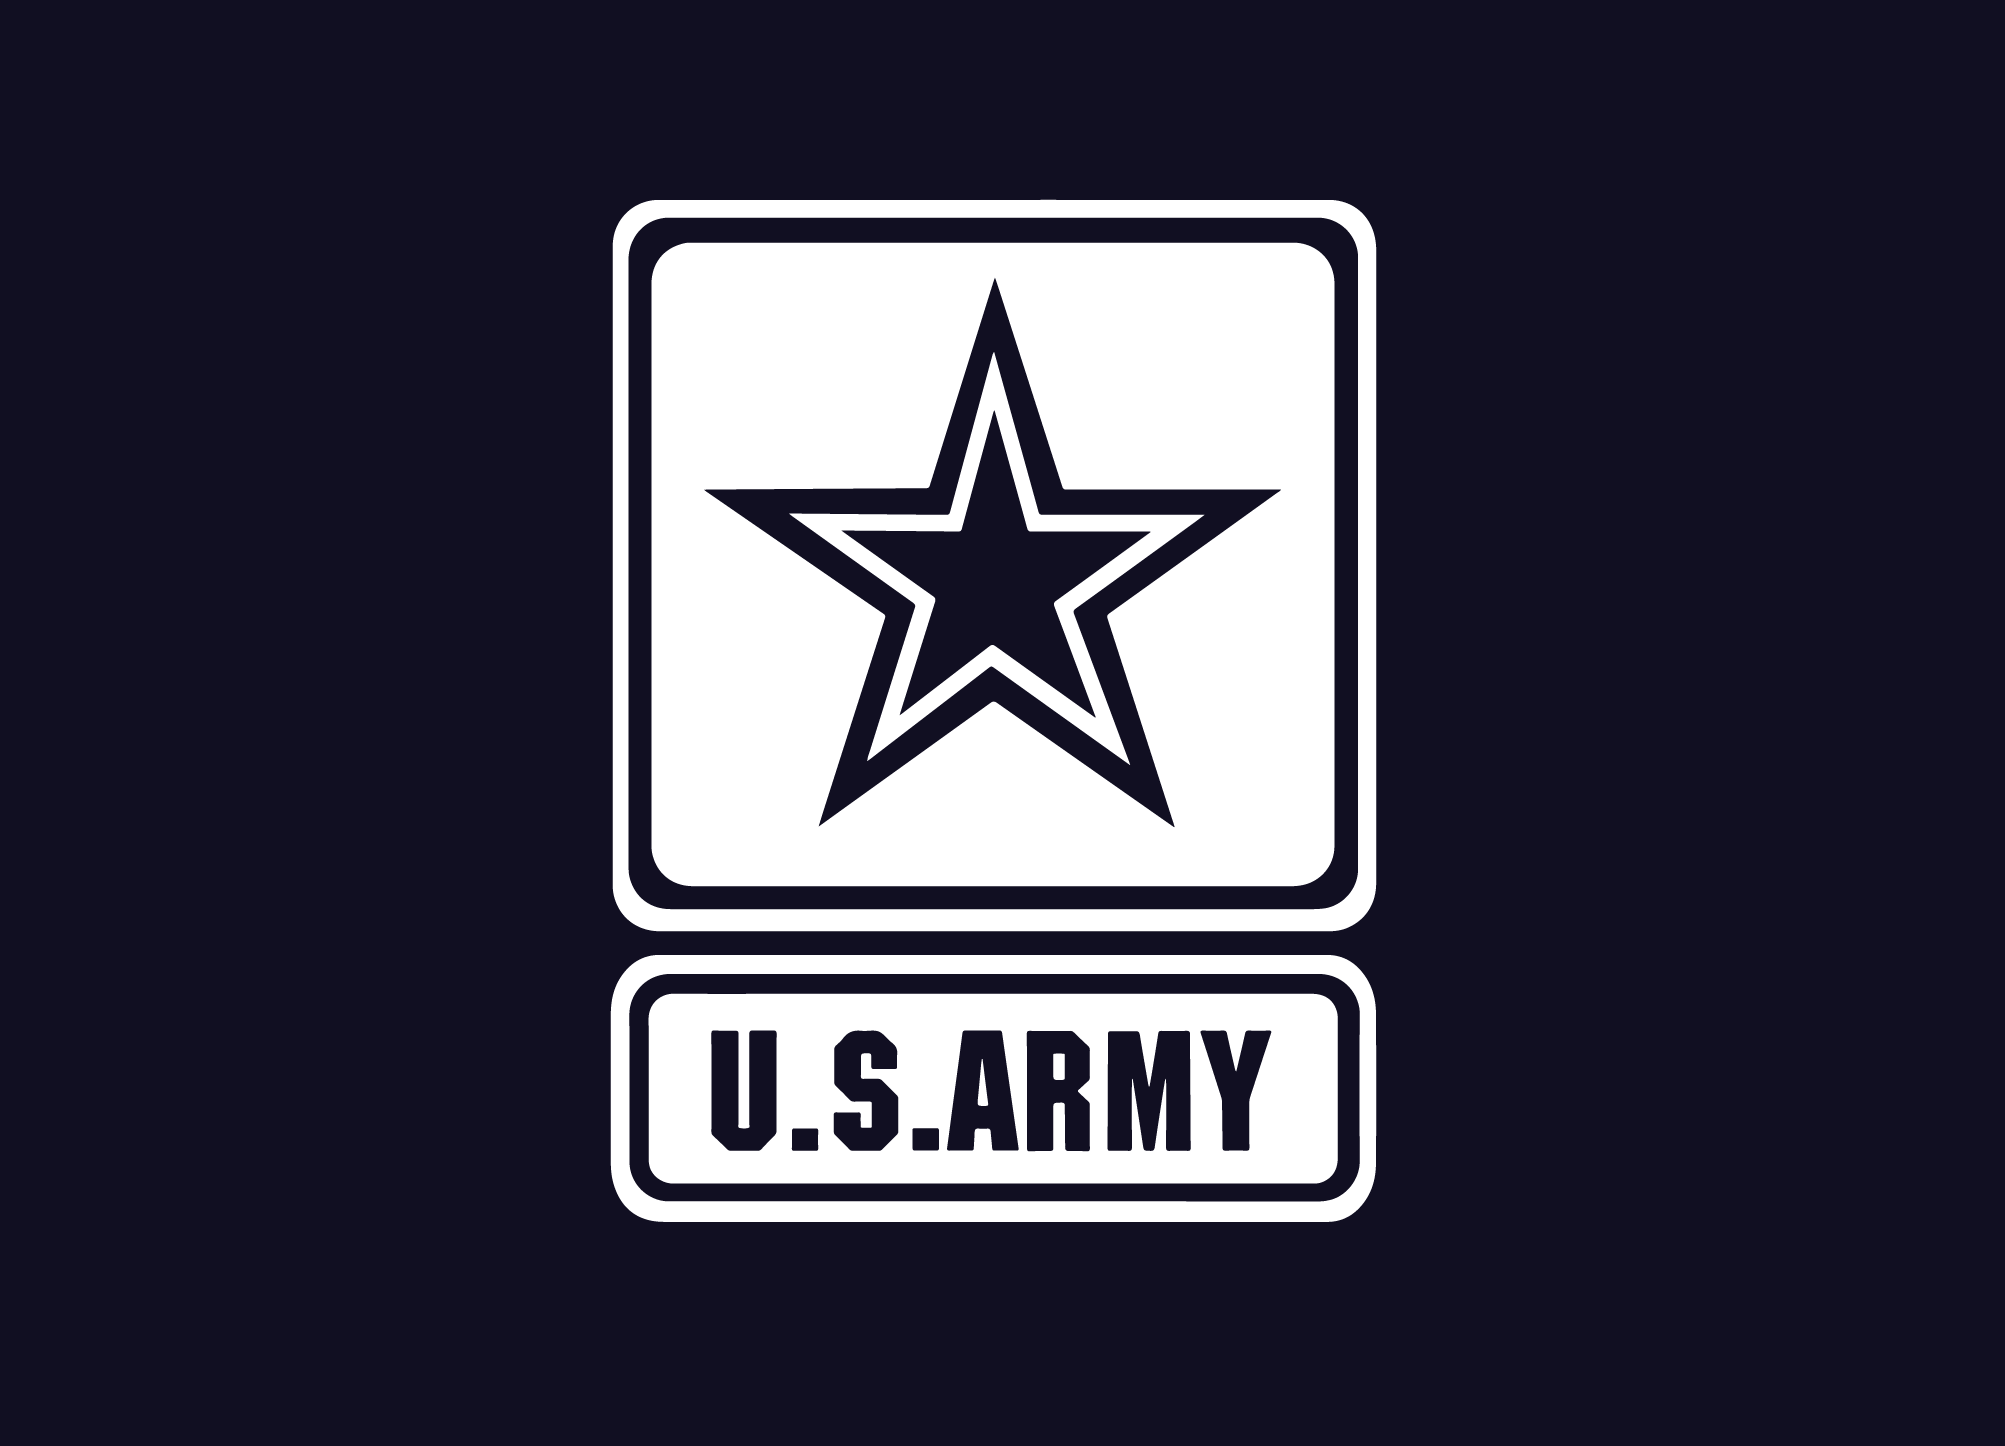 USArmy.png